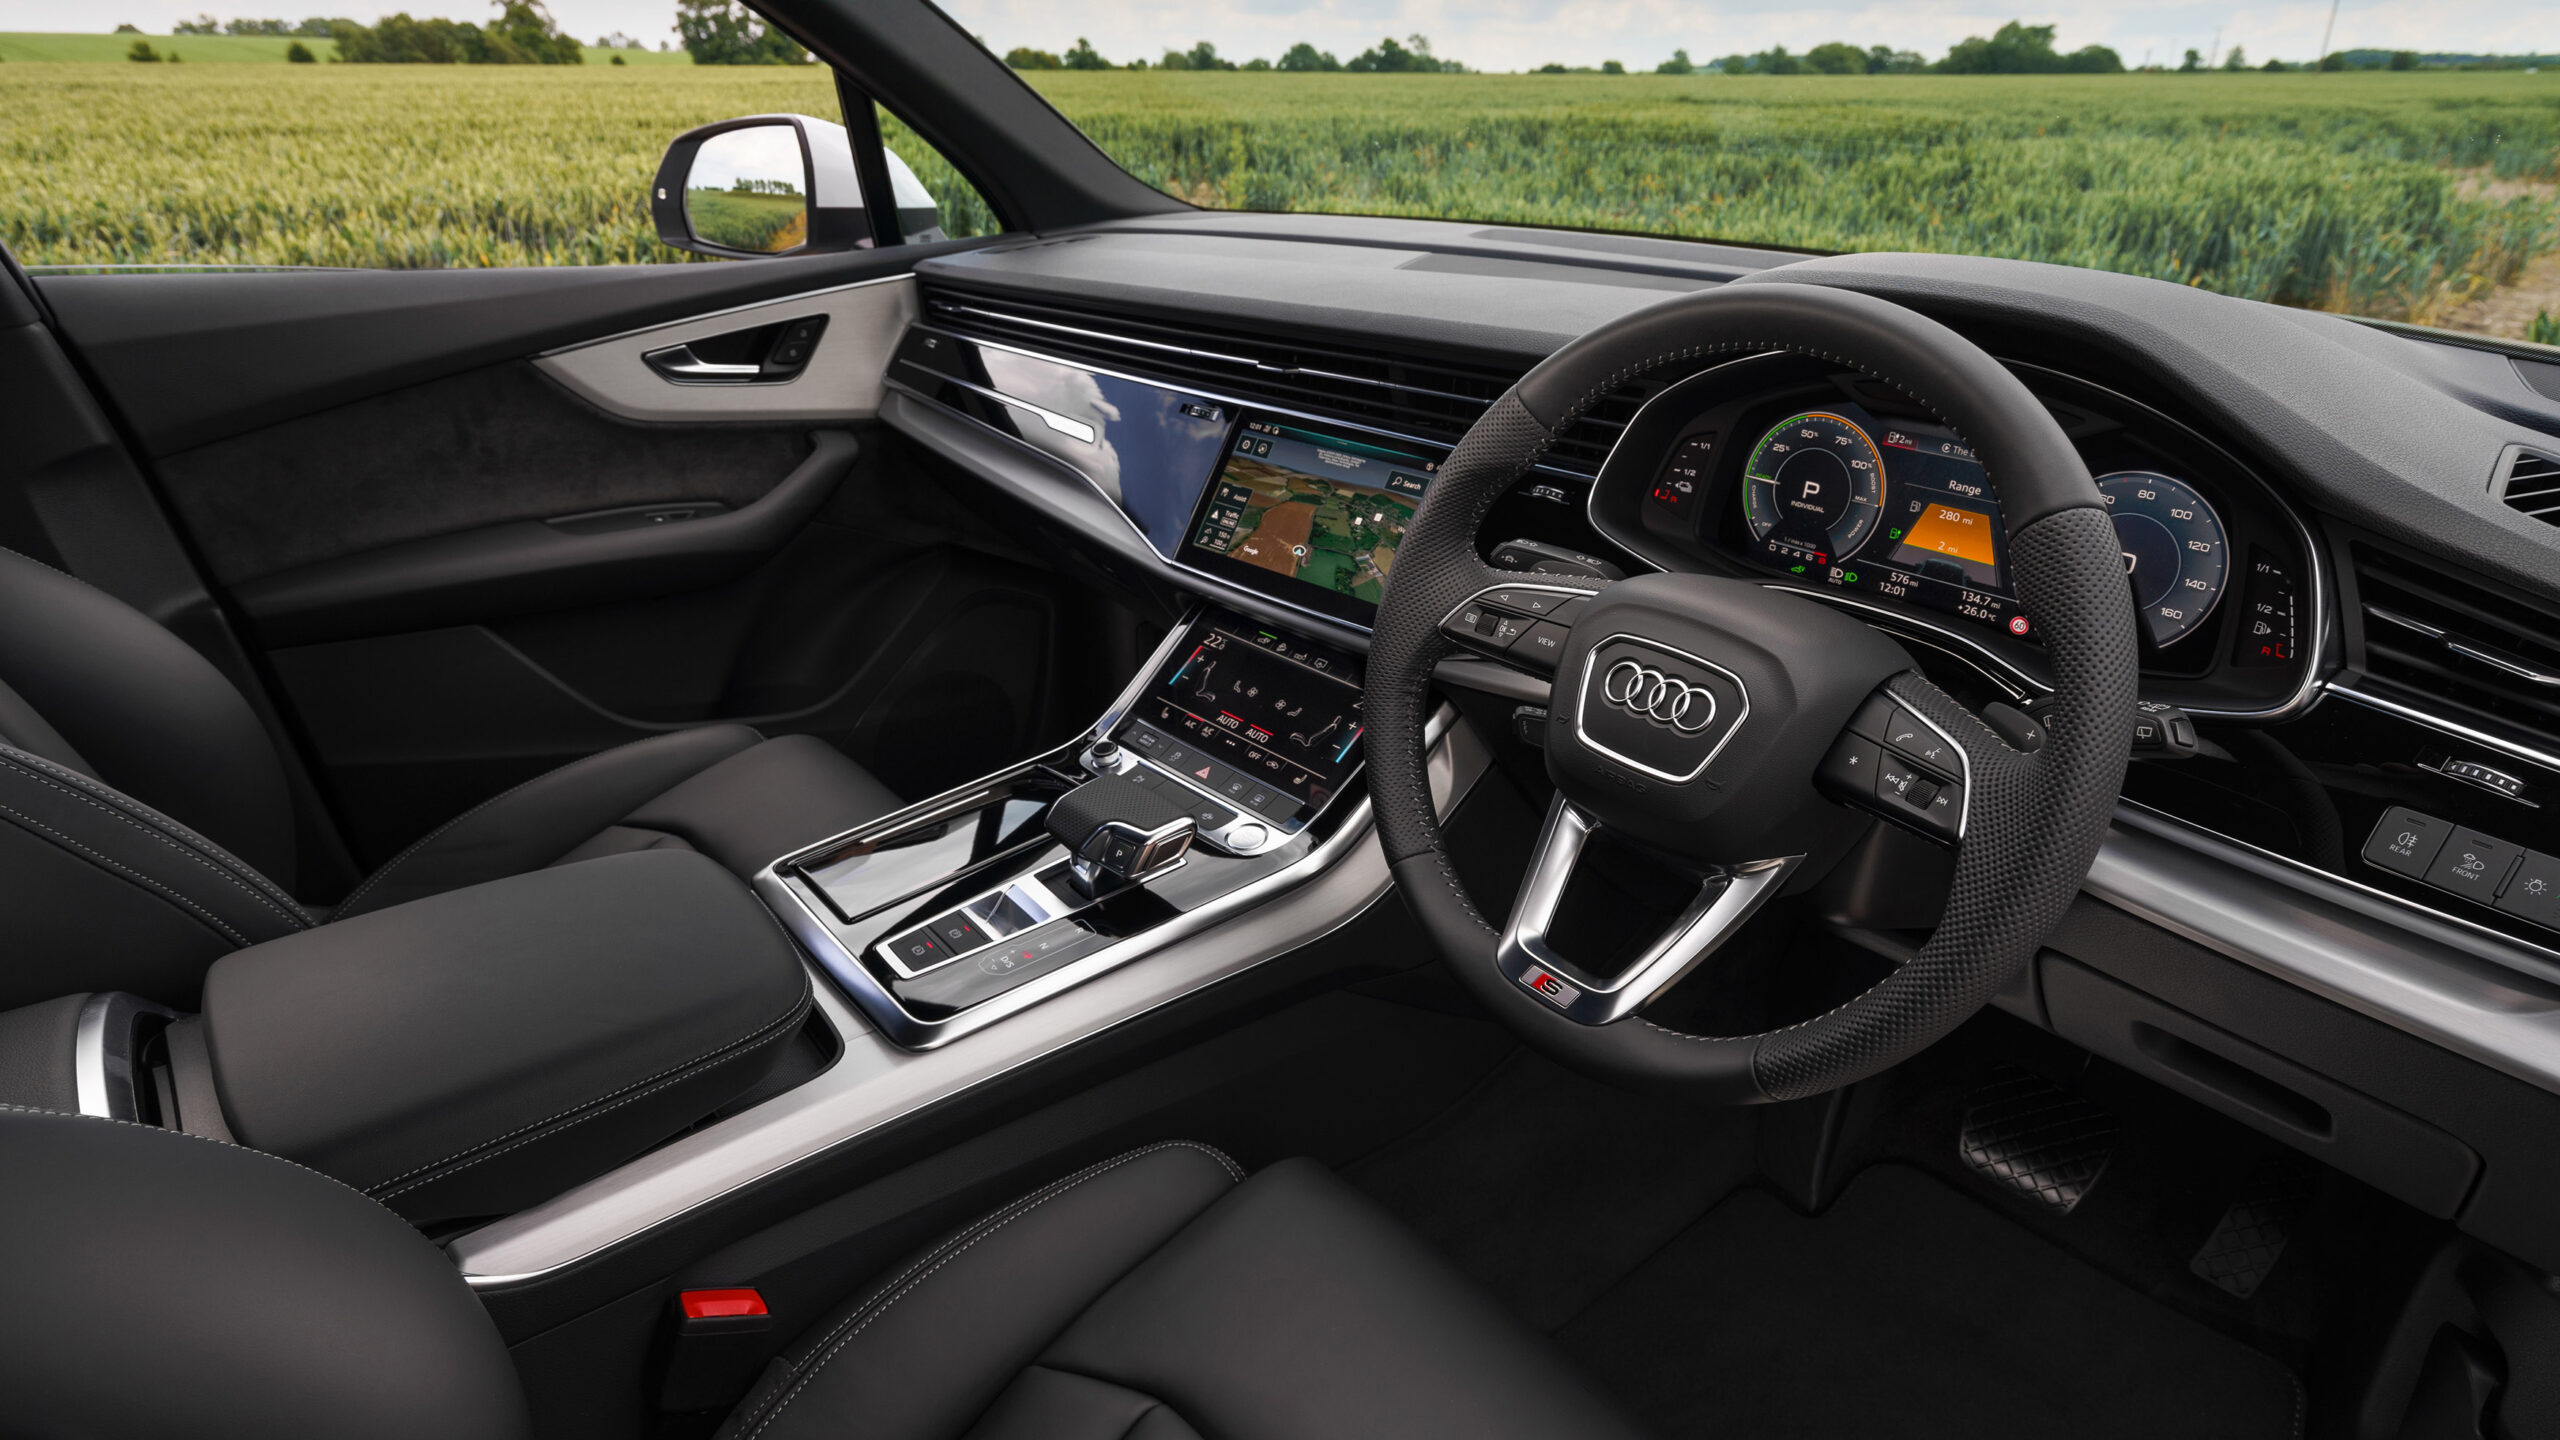 Audi Q7 - Cabin and Practicality